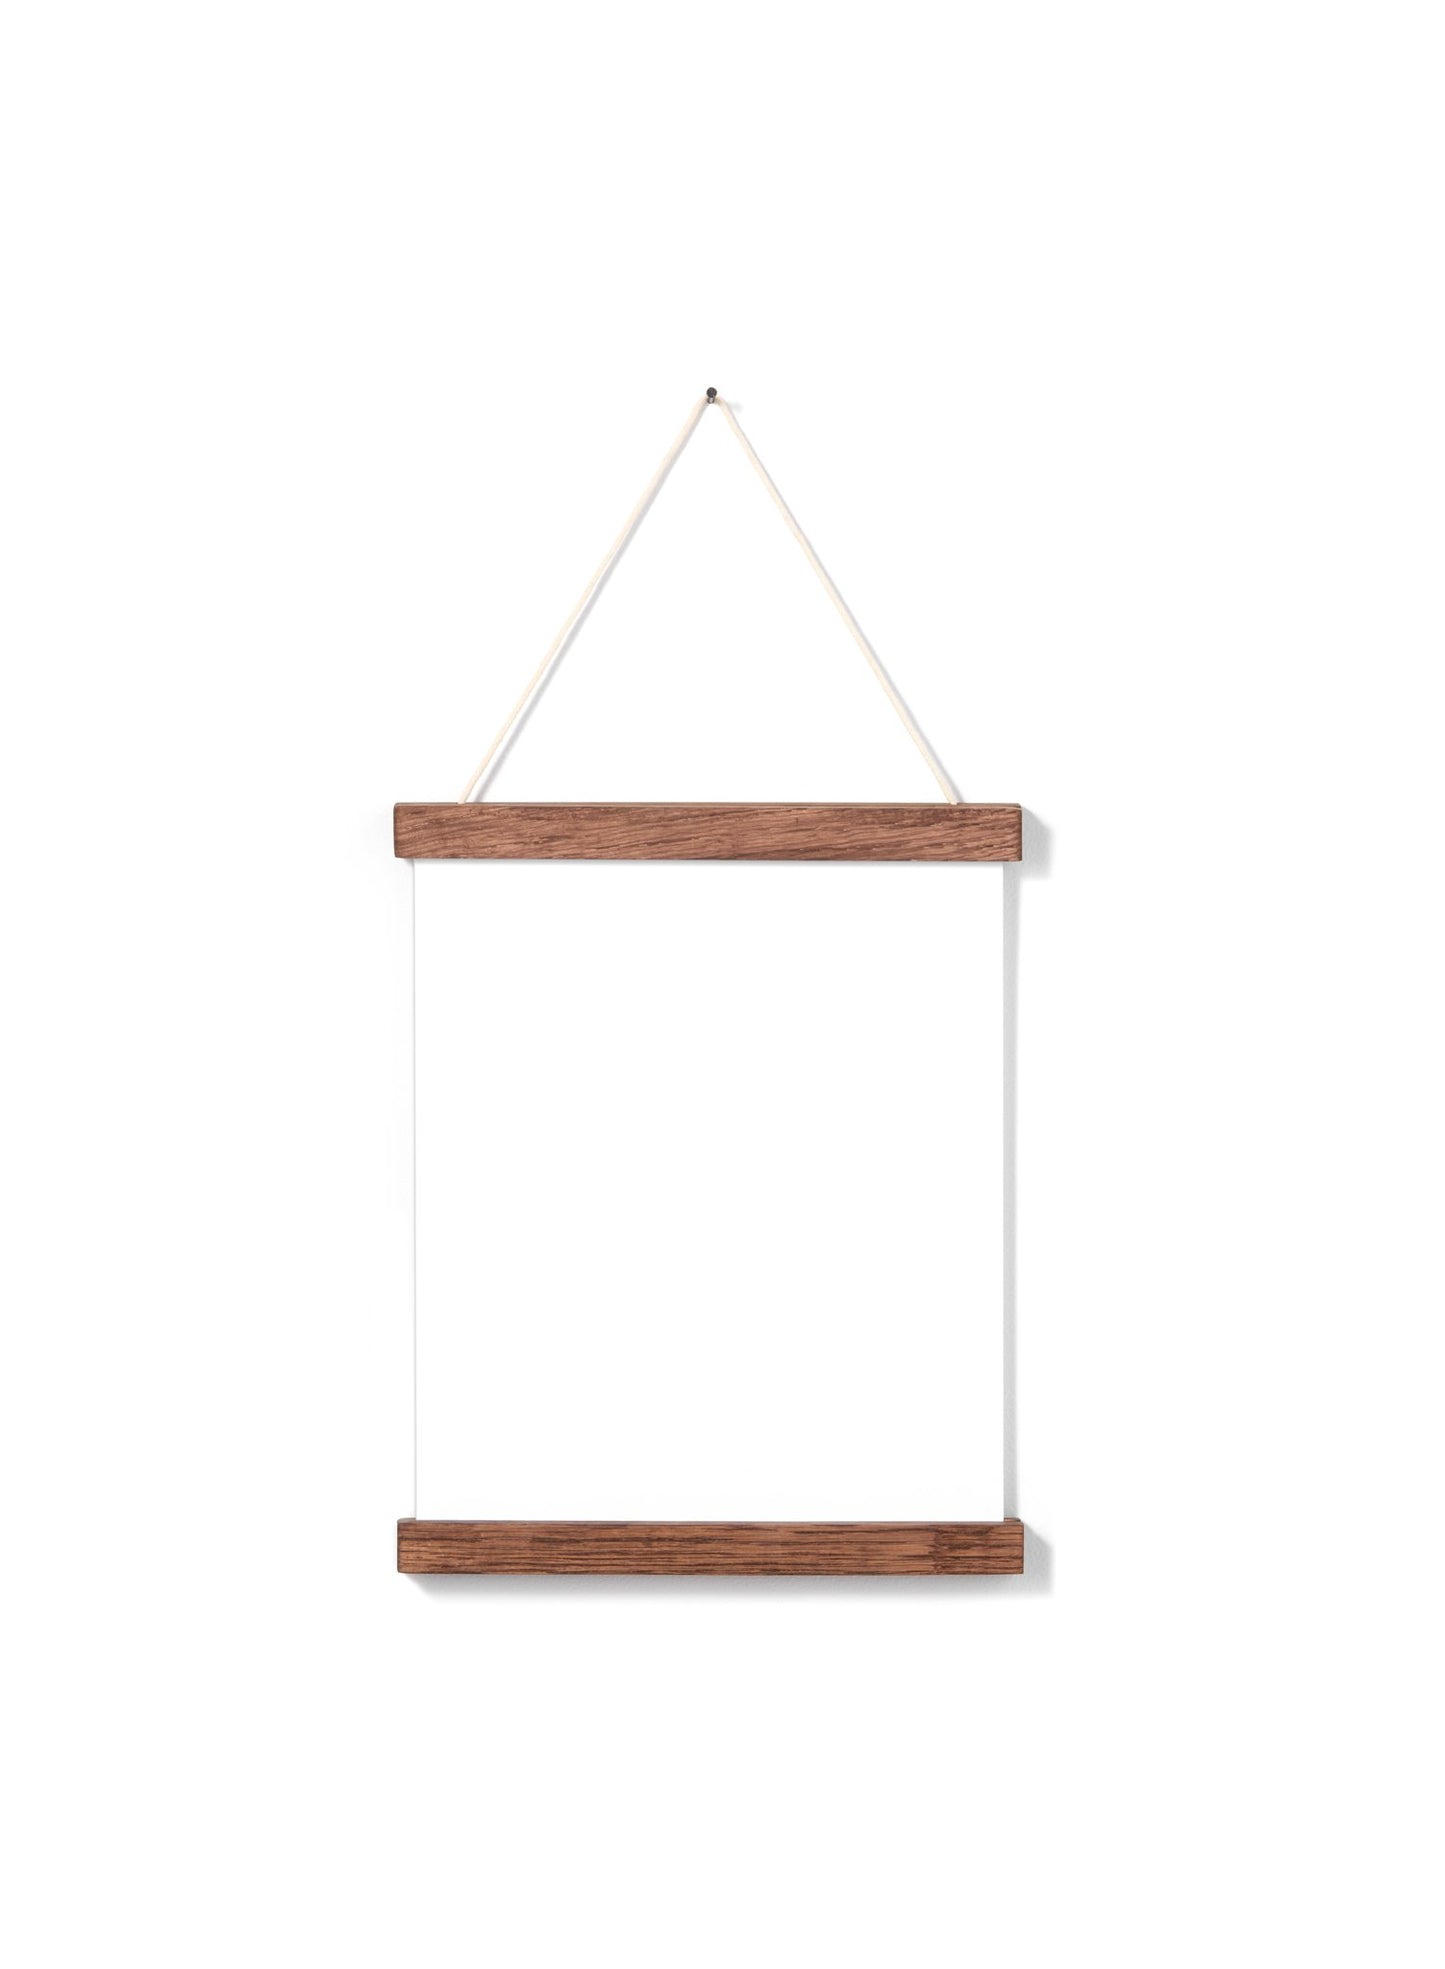 Scandinavian dark oak poster wall hanger by Opposite Wall - Front of the poster hanger - Size 8 inches